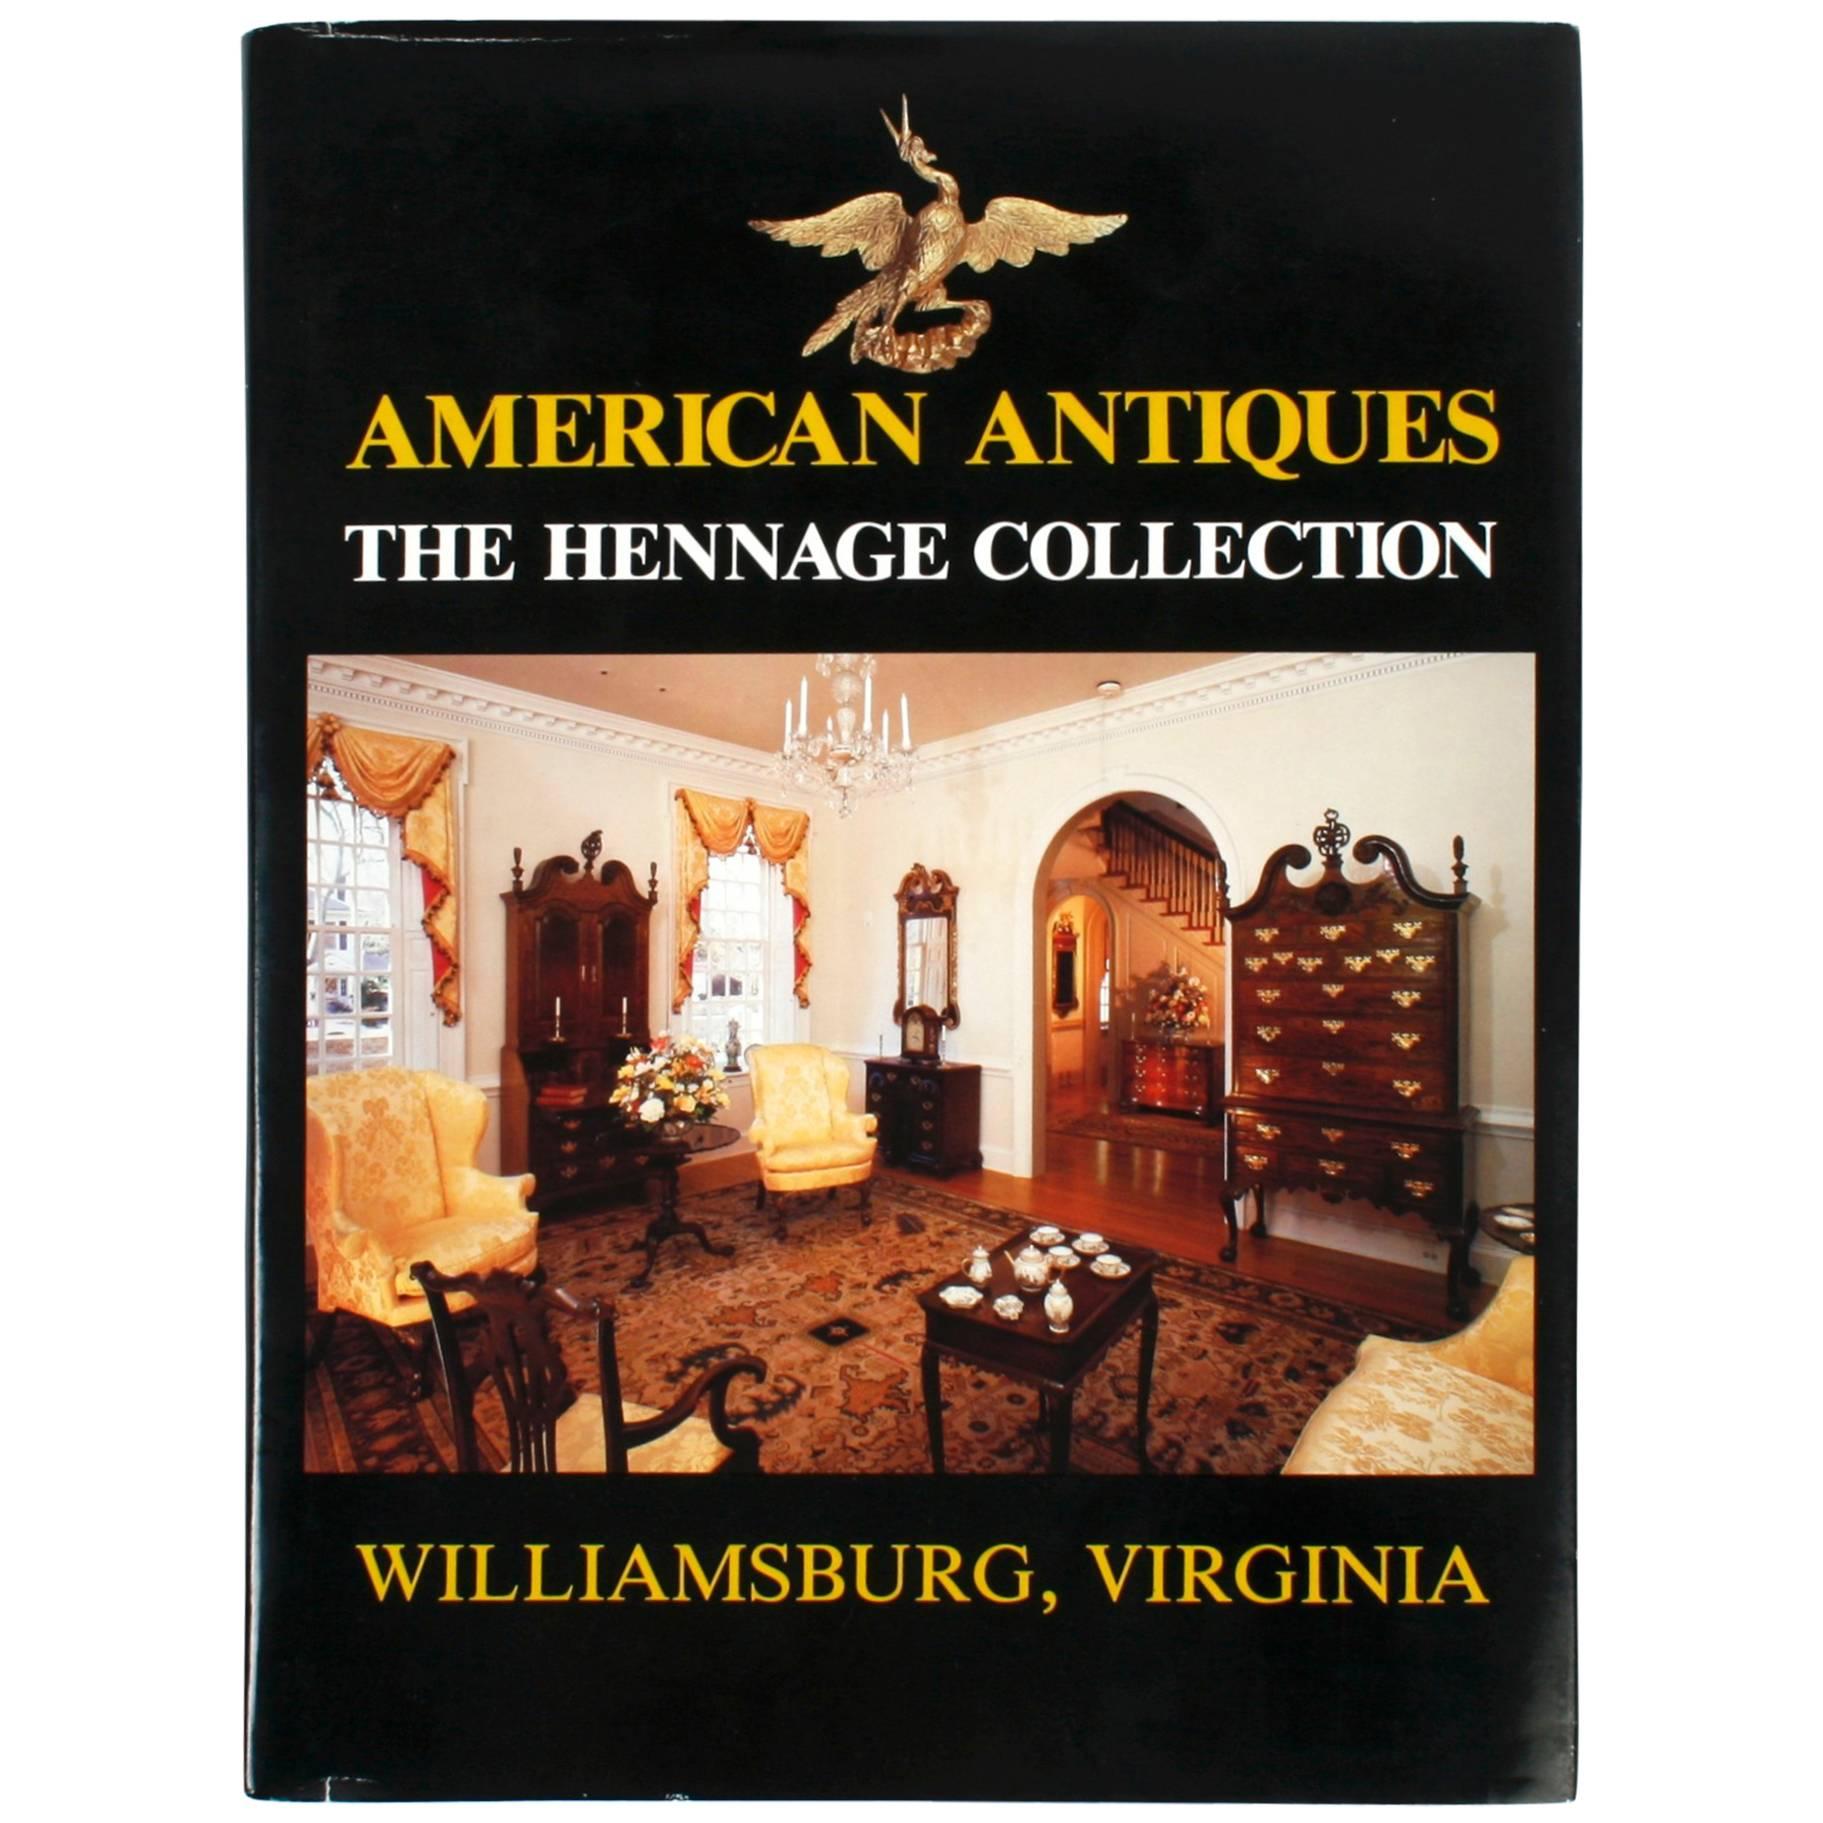 American Antiques: The Hennage Collection, Williamsburg, Virginia, 1st Ed